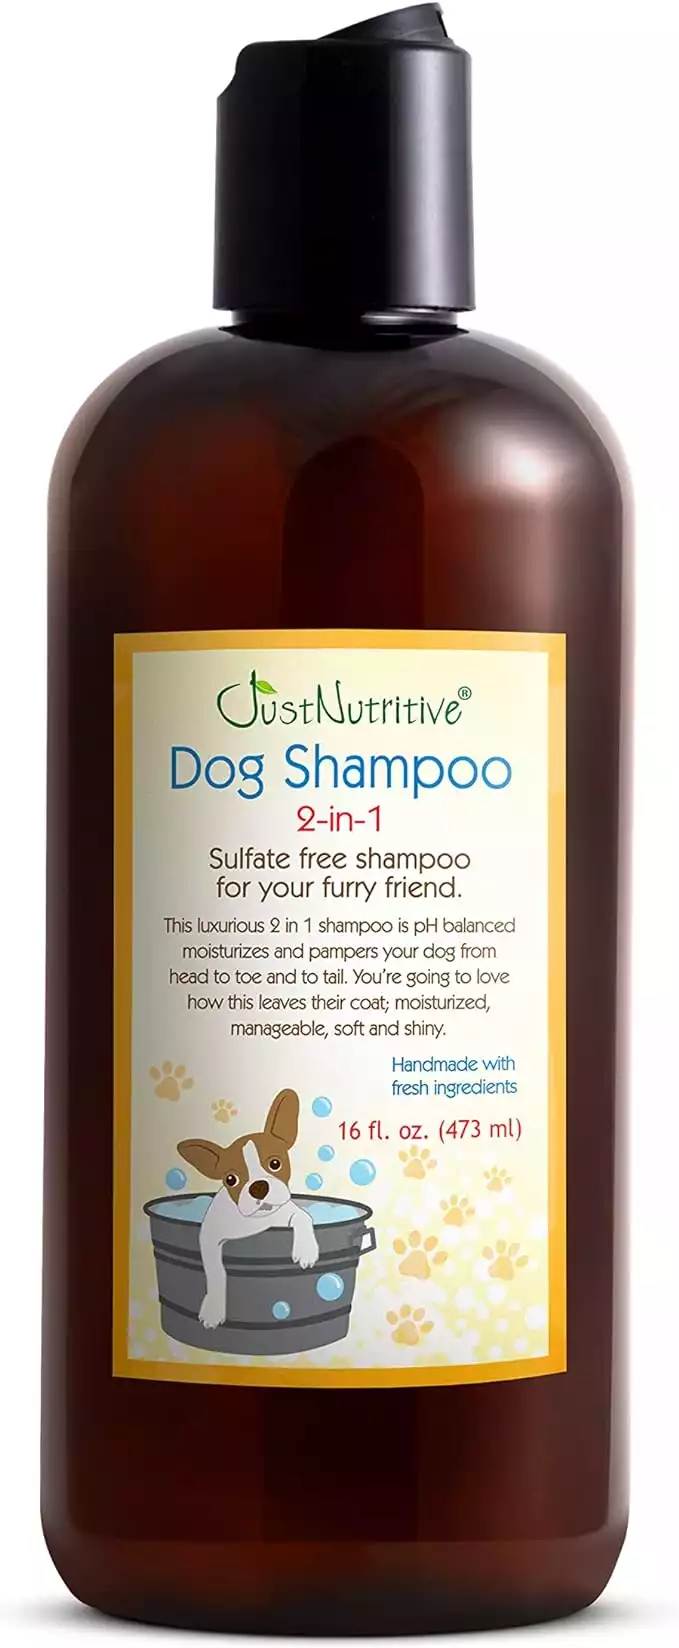 Just Nutritive 2-in-1 Dog Shampoo